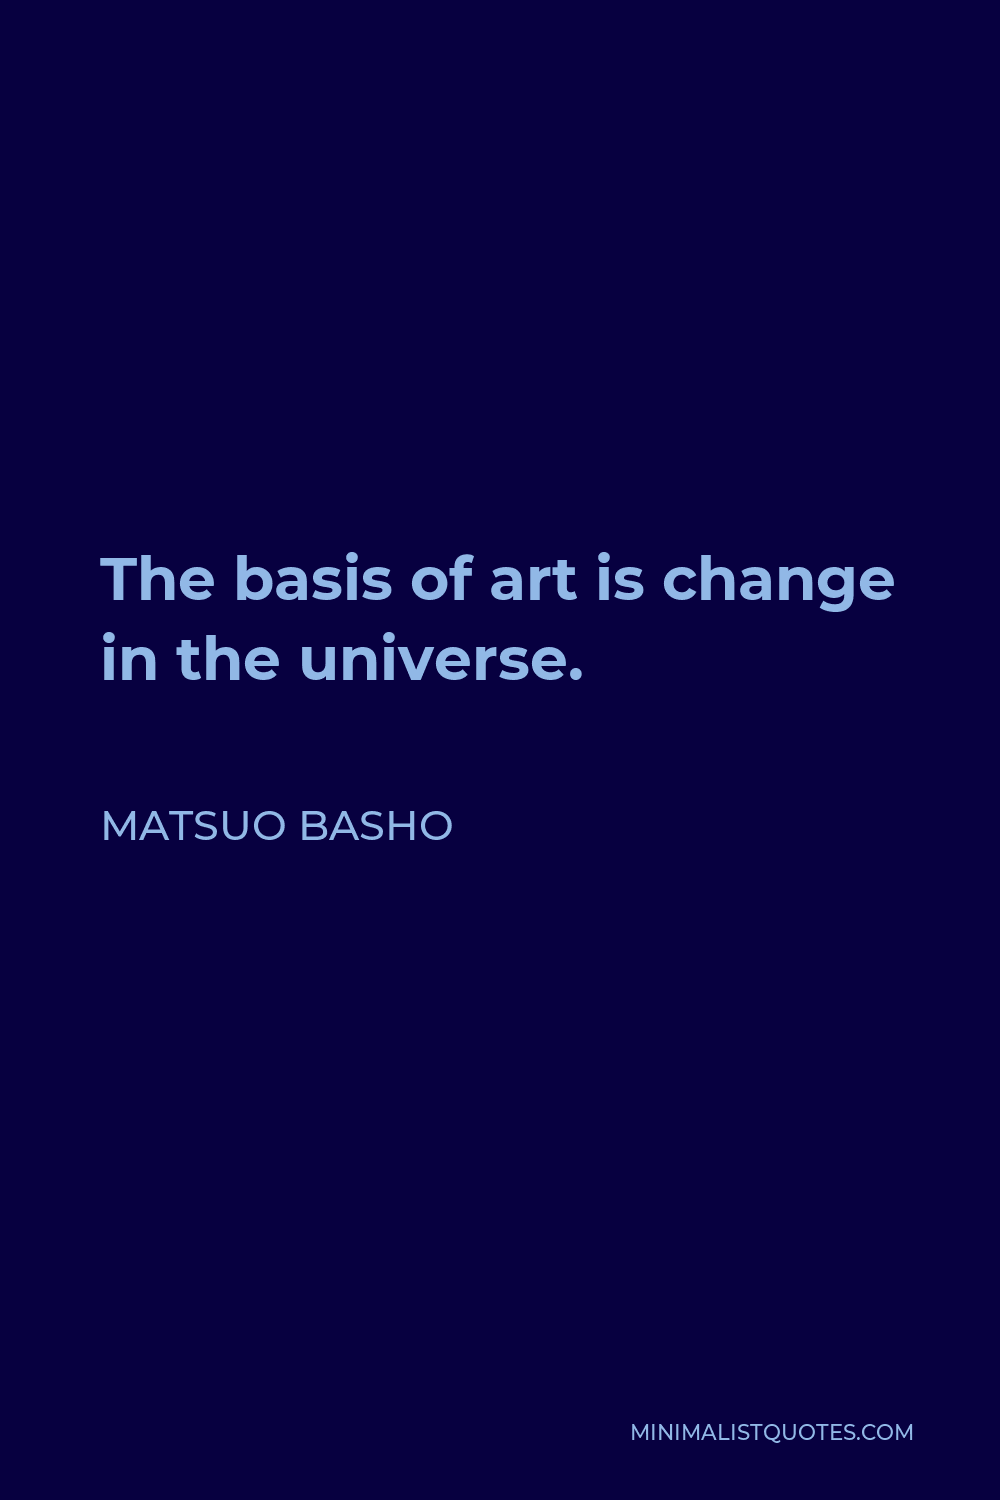 Matsuo Basho Quote - The basis of art is change in the universe.